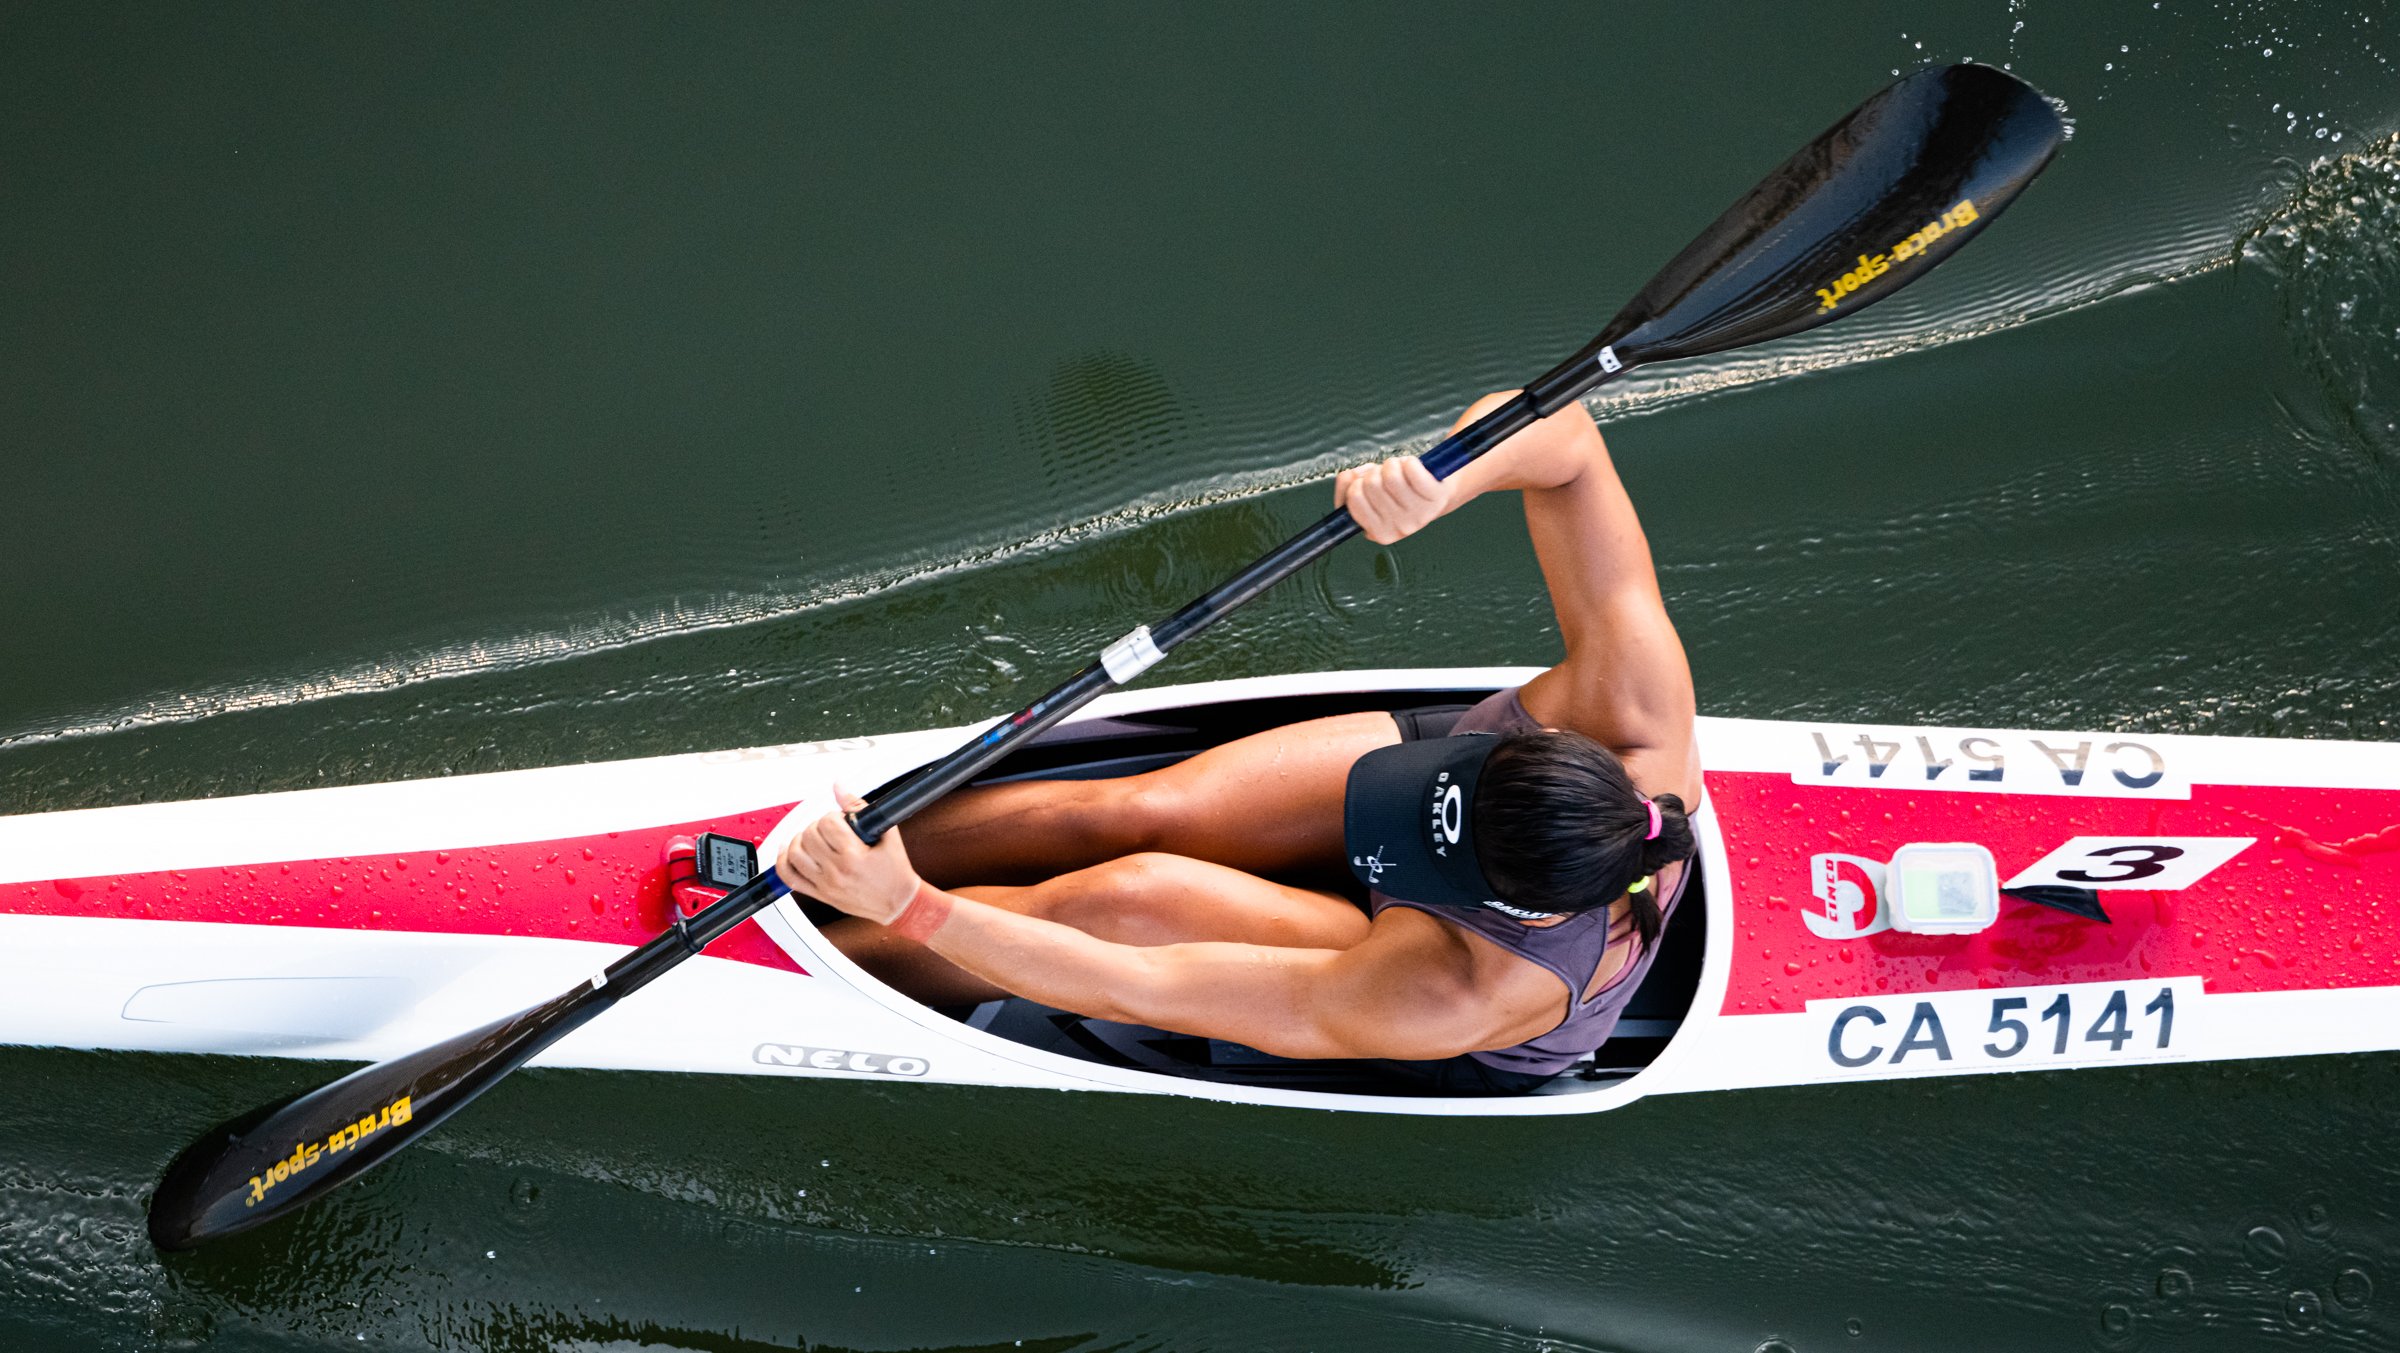 A Singaporean Kayaker paddles during the Singapore Sprint Cup at the Marina Channel.